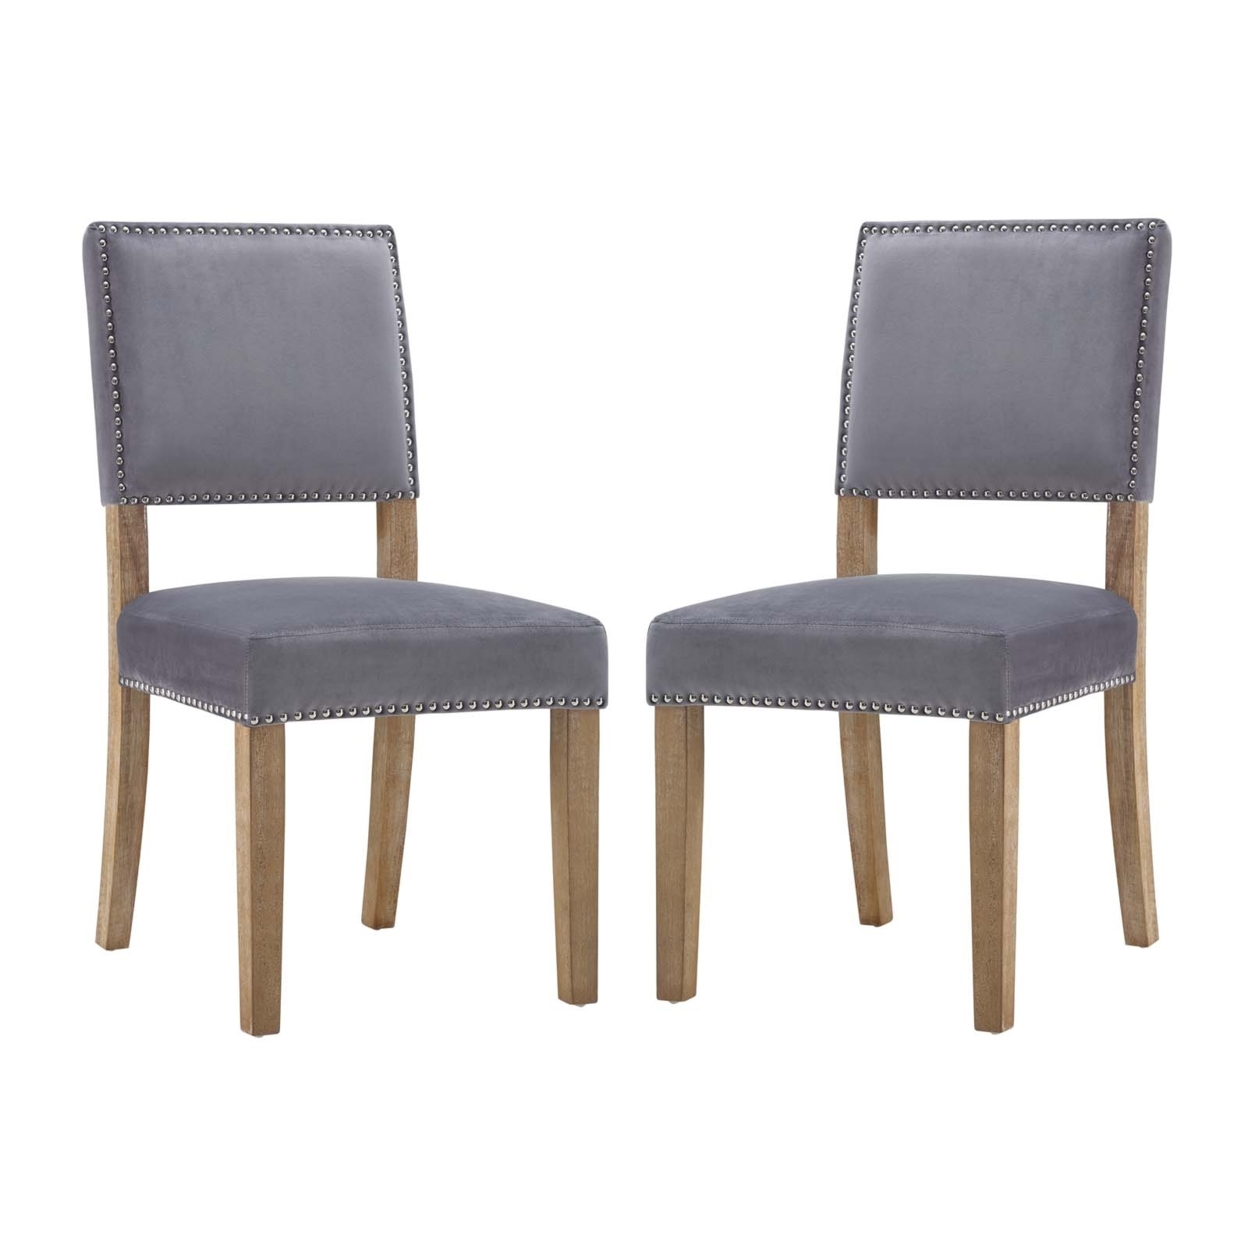 Oblige Dining Chair Wood Set Of 2,Gray